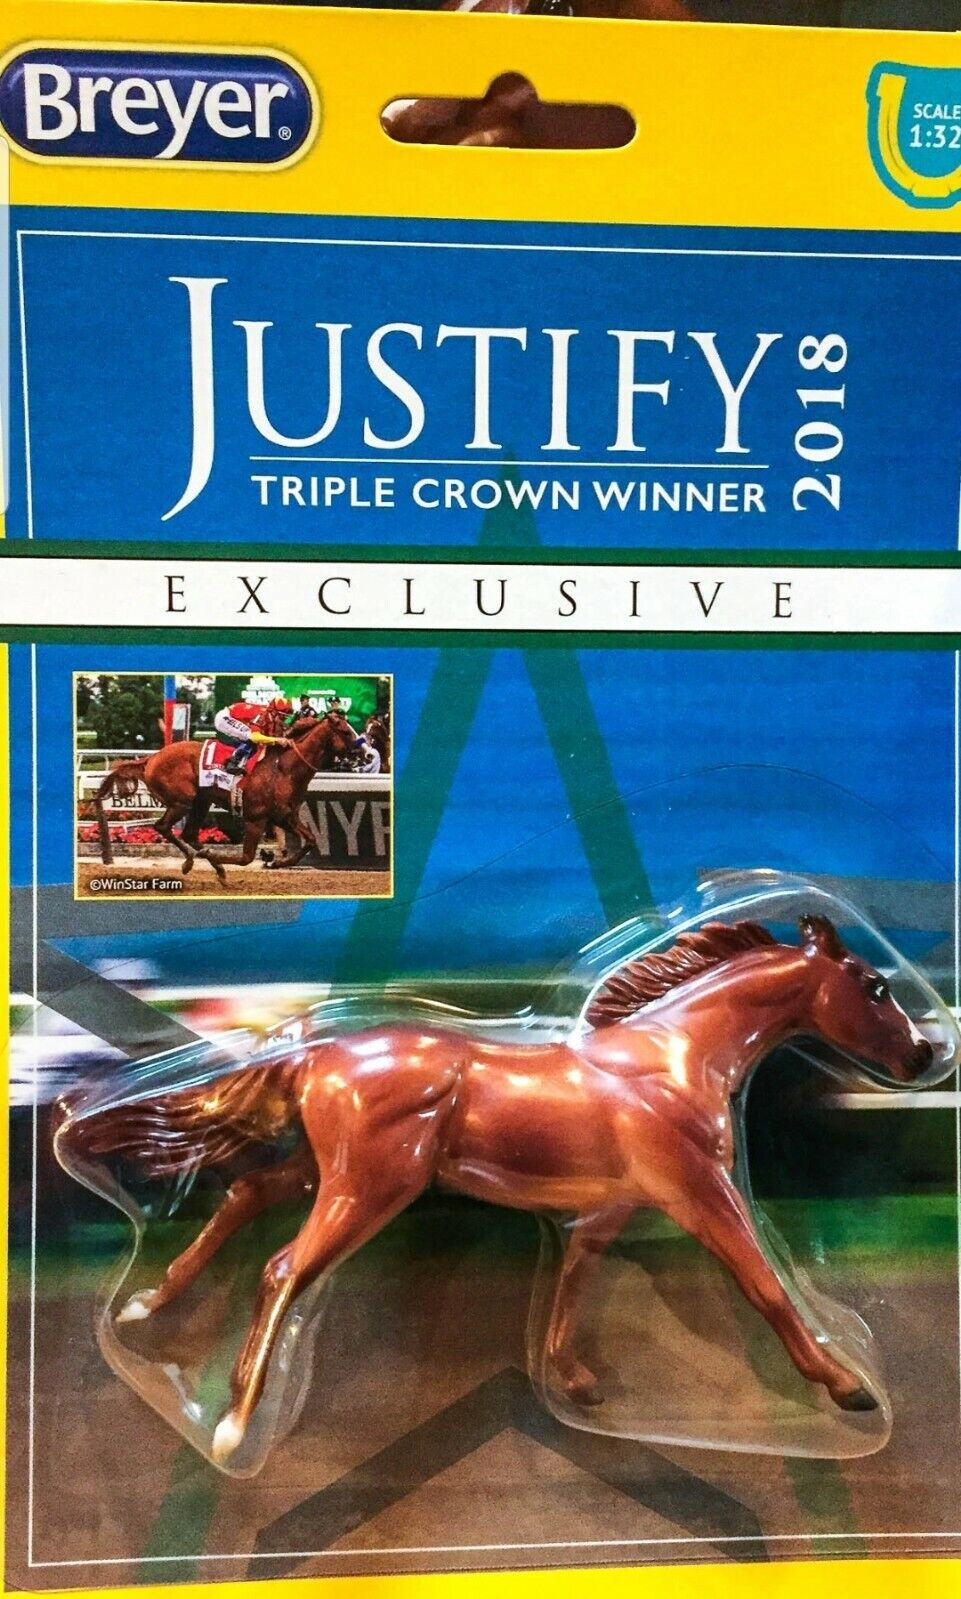 THOROUGHBRED ~ JUSTIFY 1:32 ~ UNDEFEATED TRIPLE CROWN CHAMPION 9032 NEW BREYER